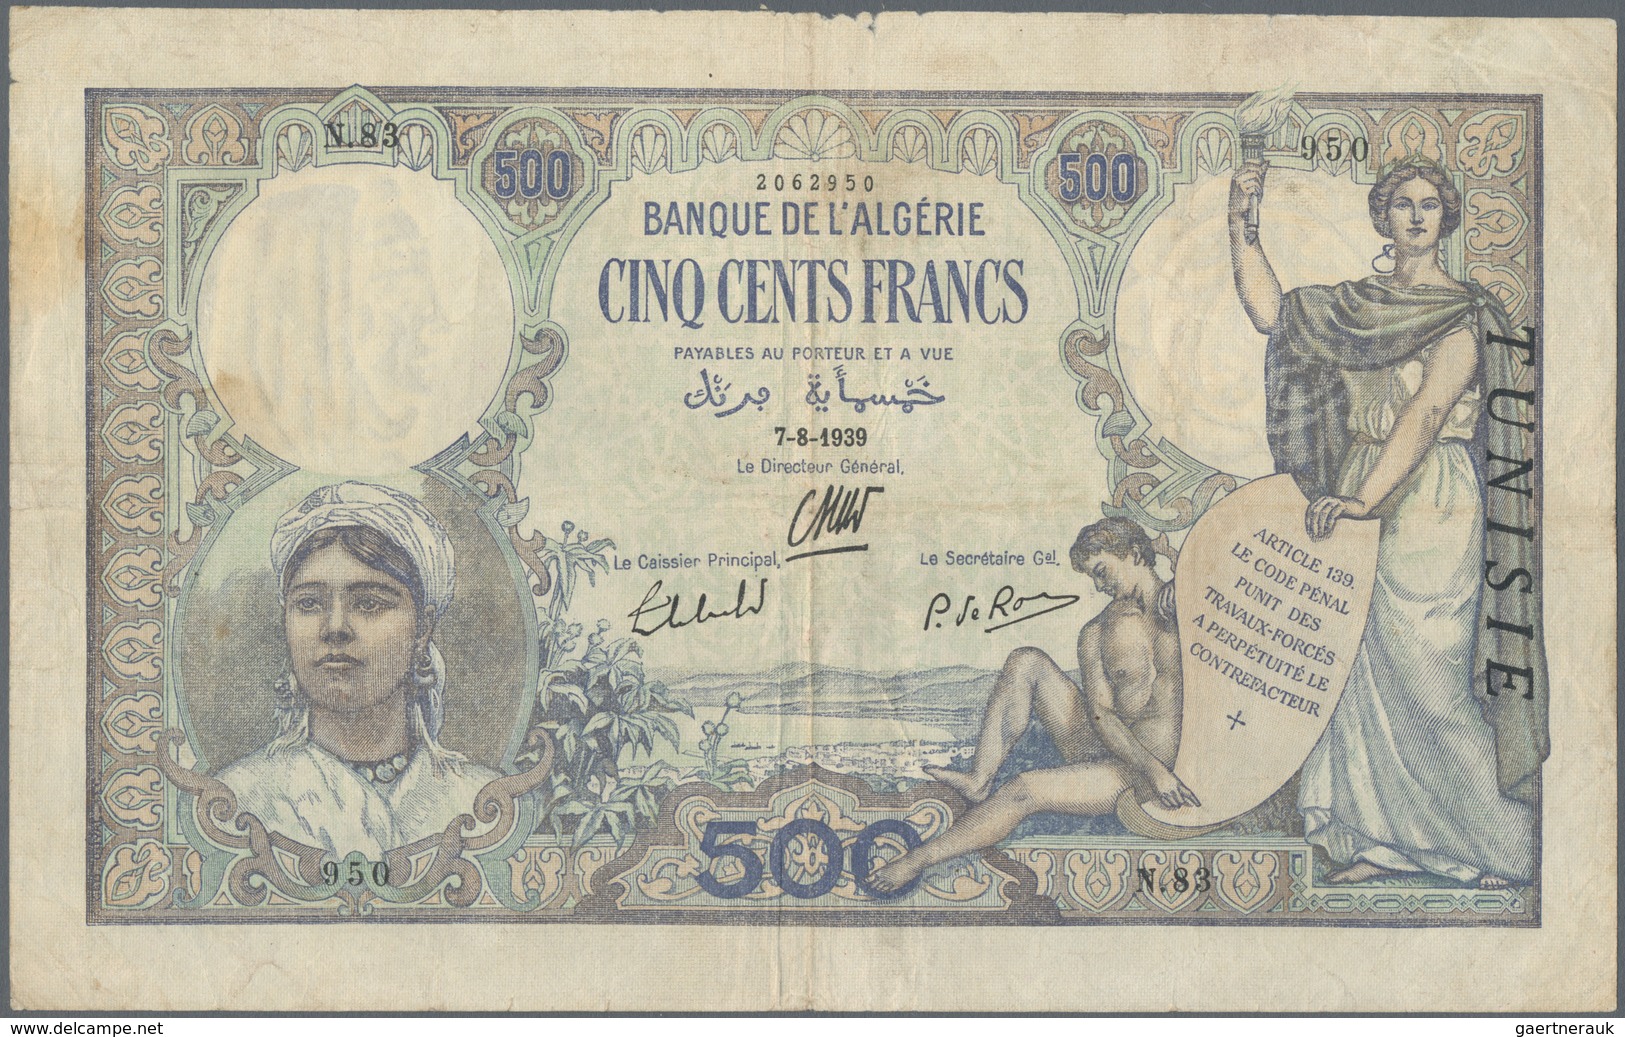 Tunisia / Tunisien: 500 Francs 1939 P. 14, Used With Several Folds And Creases, Minor Pinholes, Ligh - Tunisie